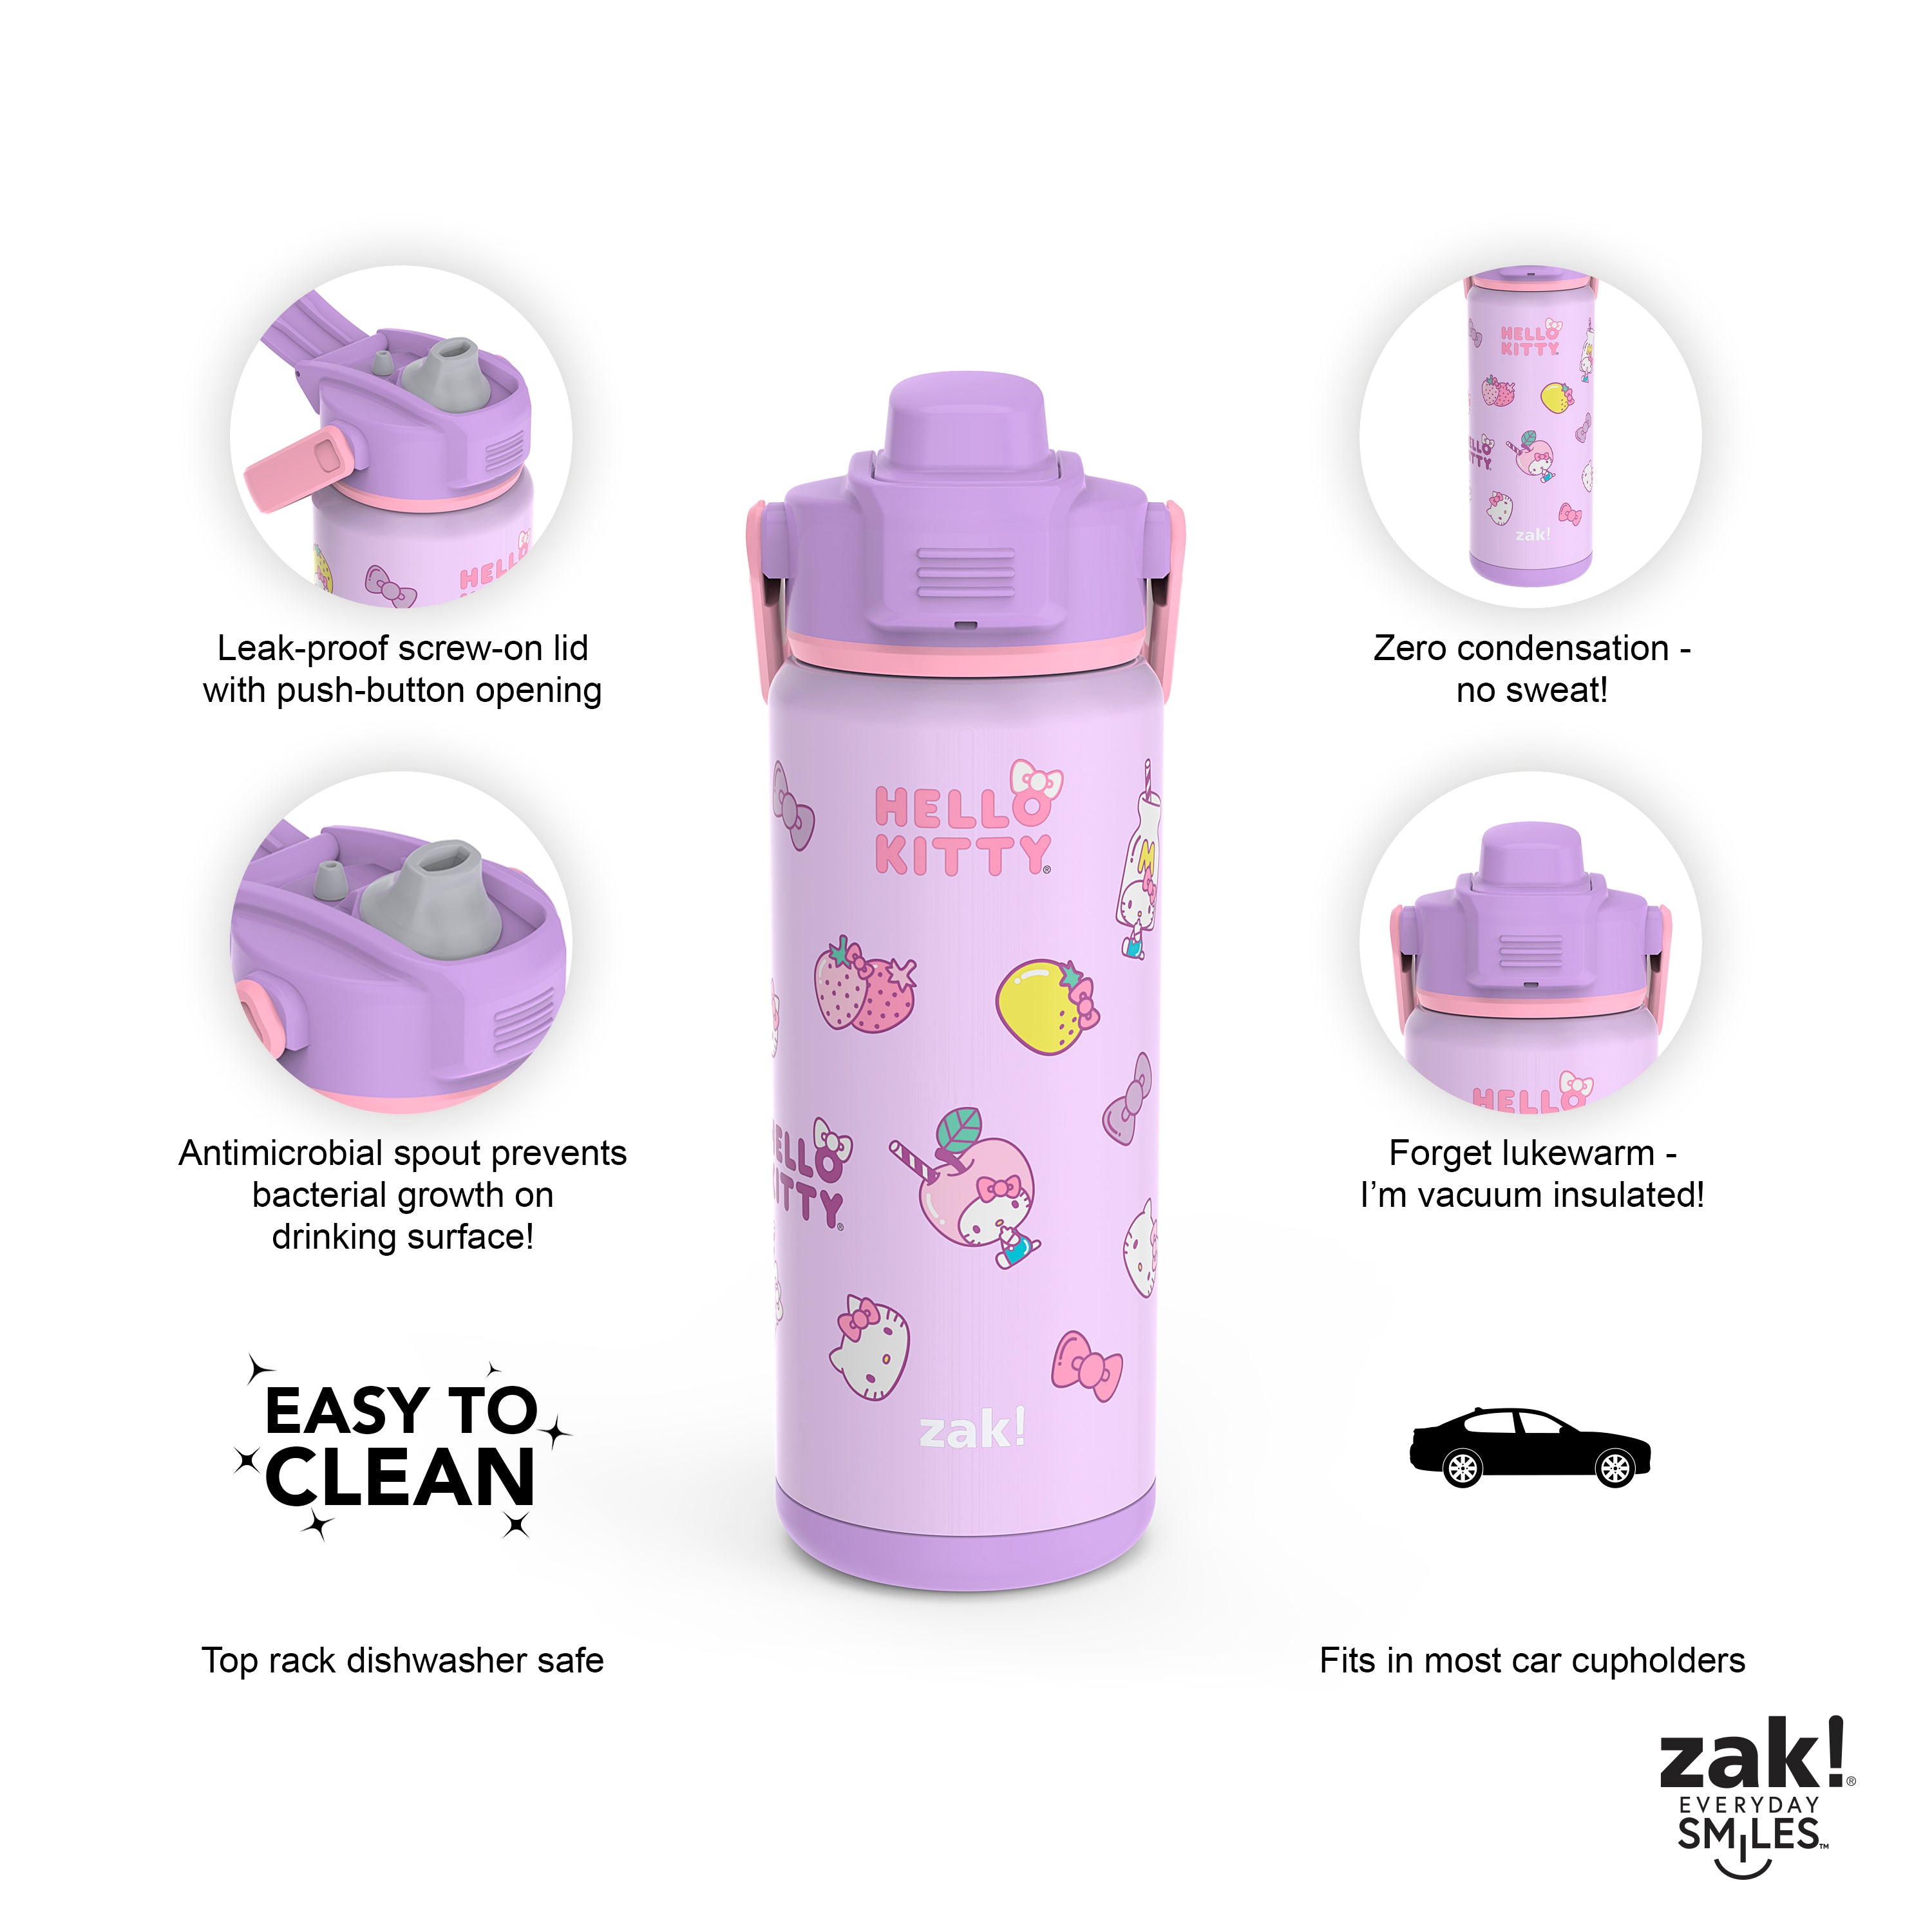 Hello kitty thermos water bottle Has some scuffs, - Depop